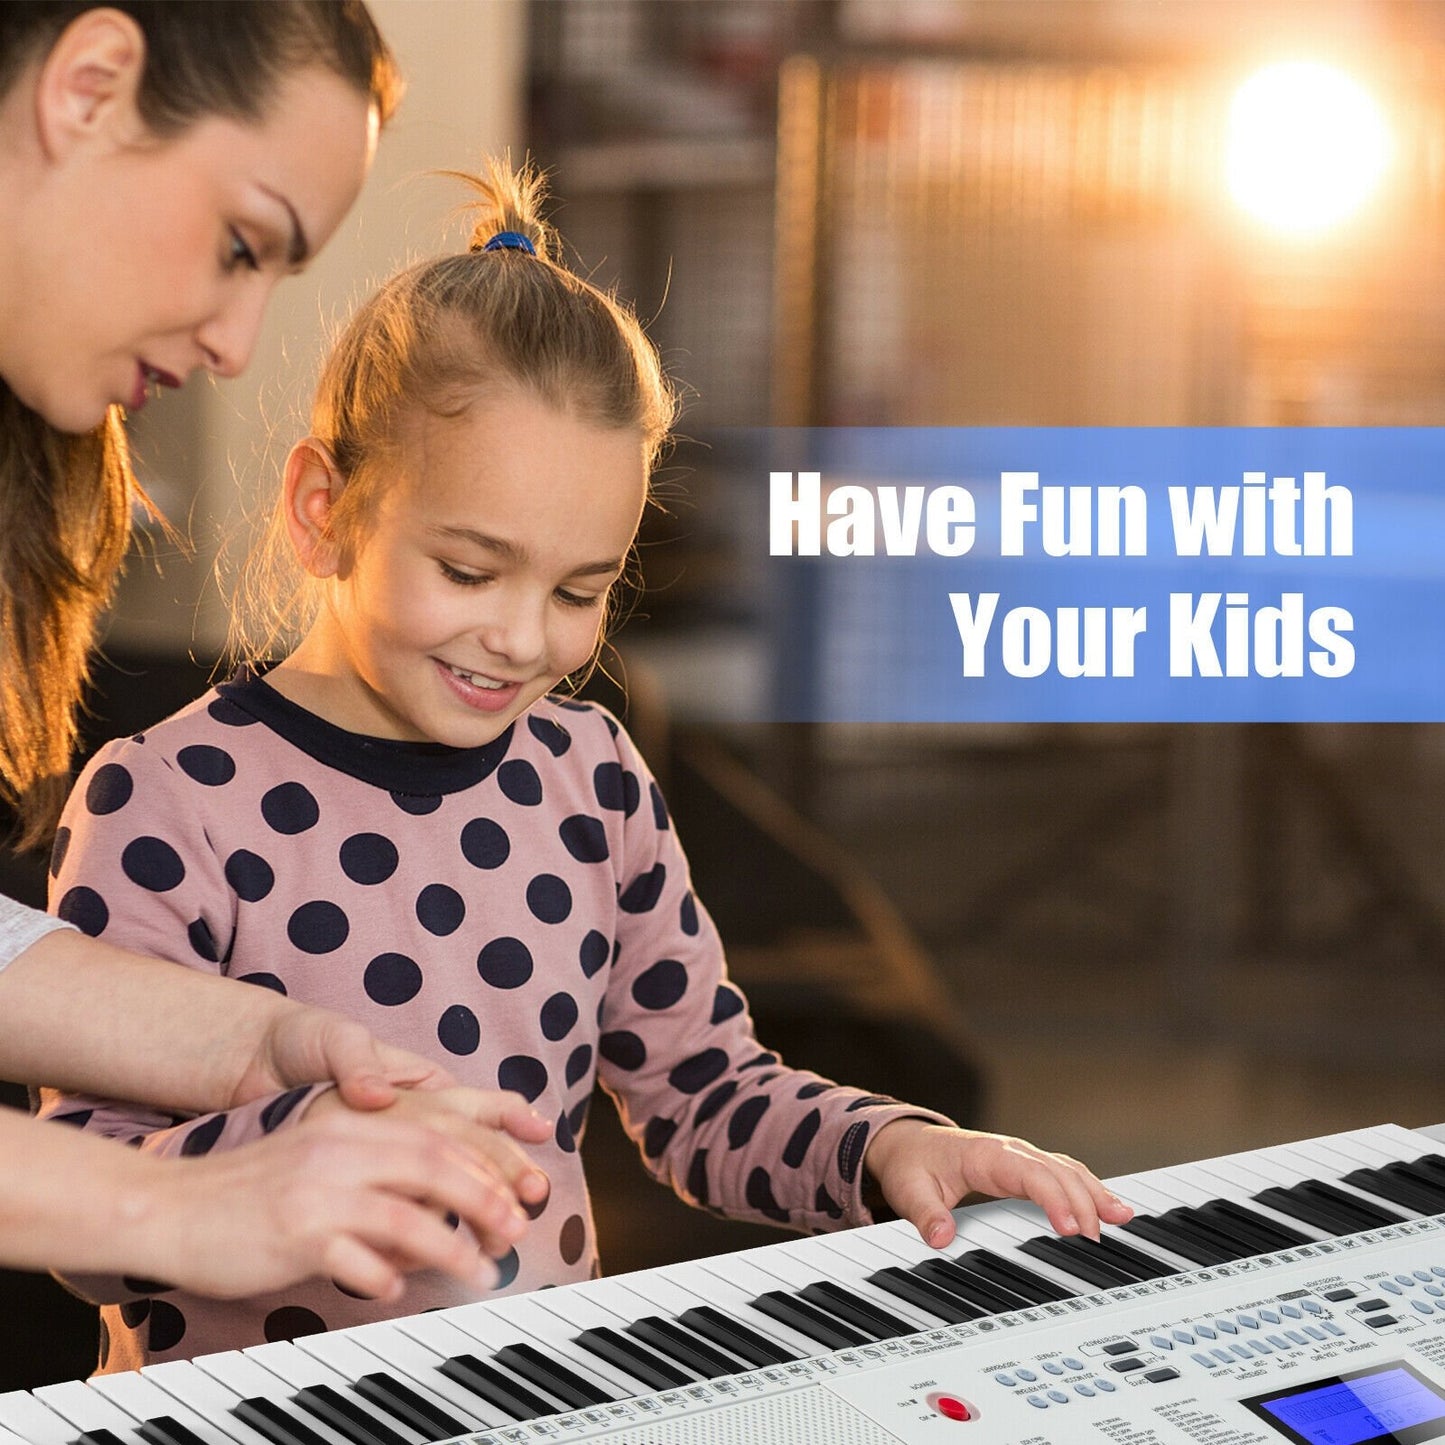 61-Key Electric Piano Keyboard for Beginner, White